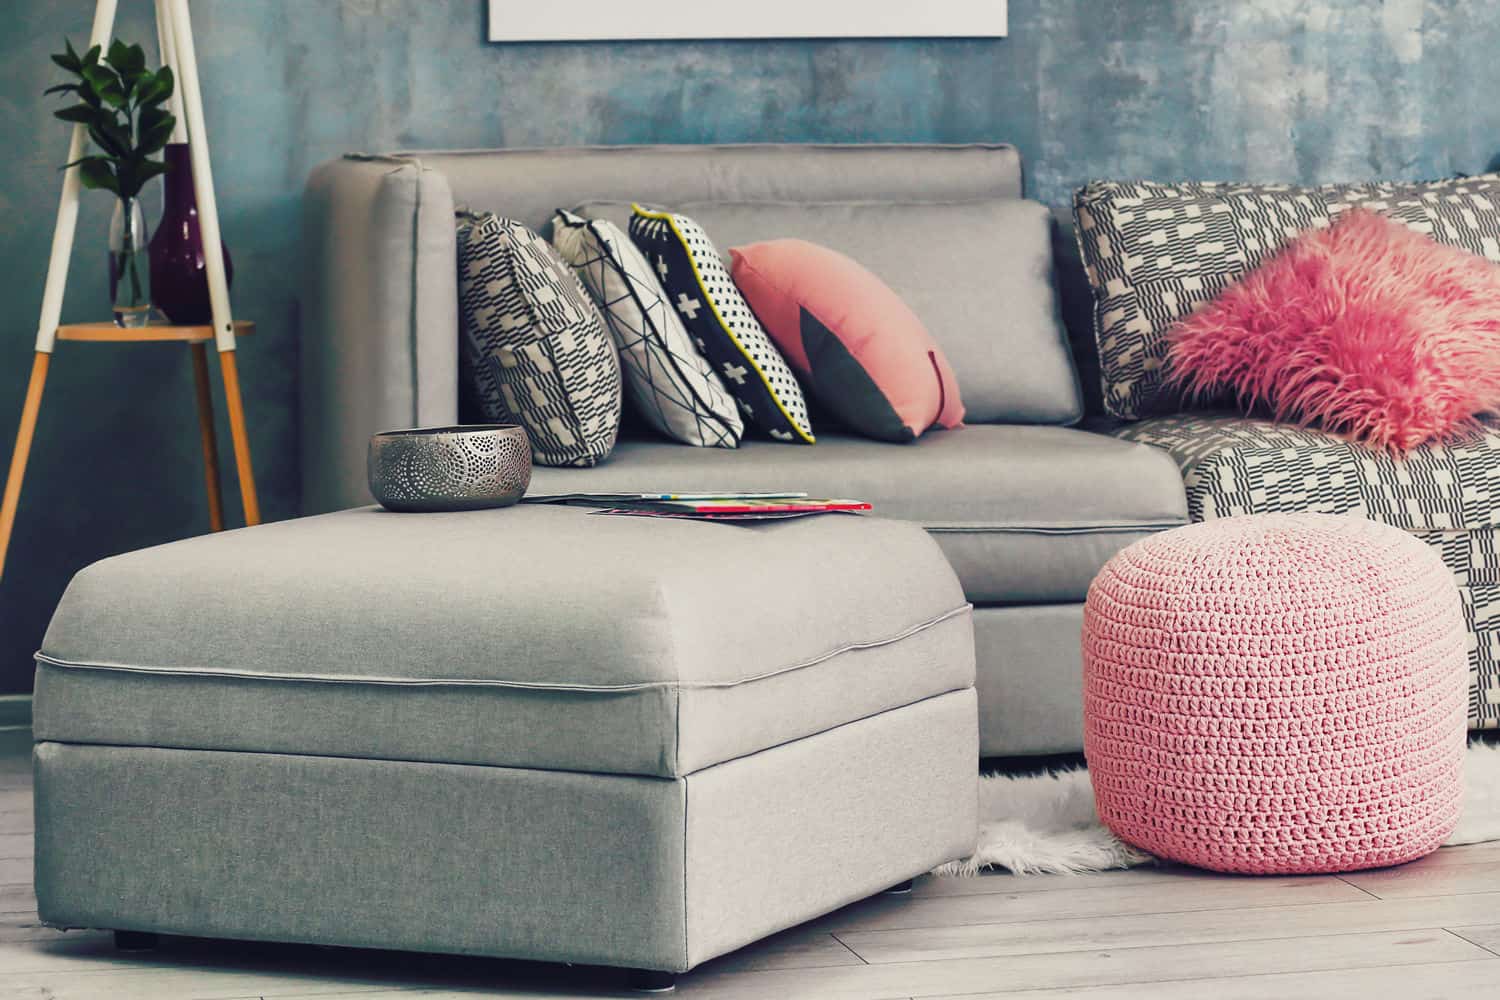 Grey ottoman and couch in room with pink decorative accents